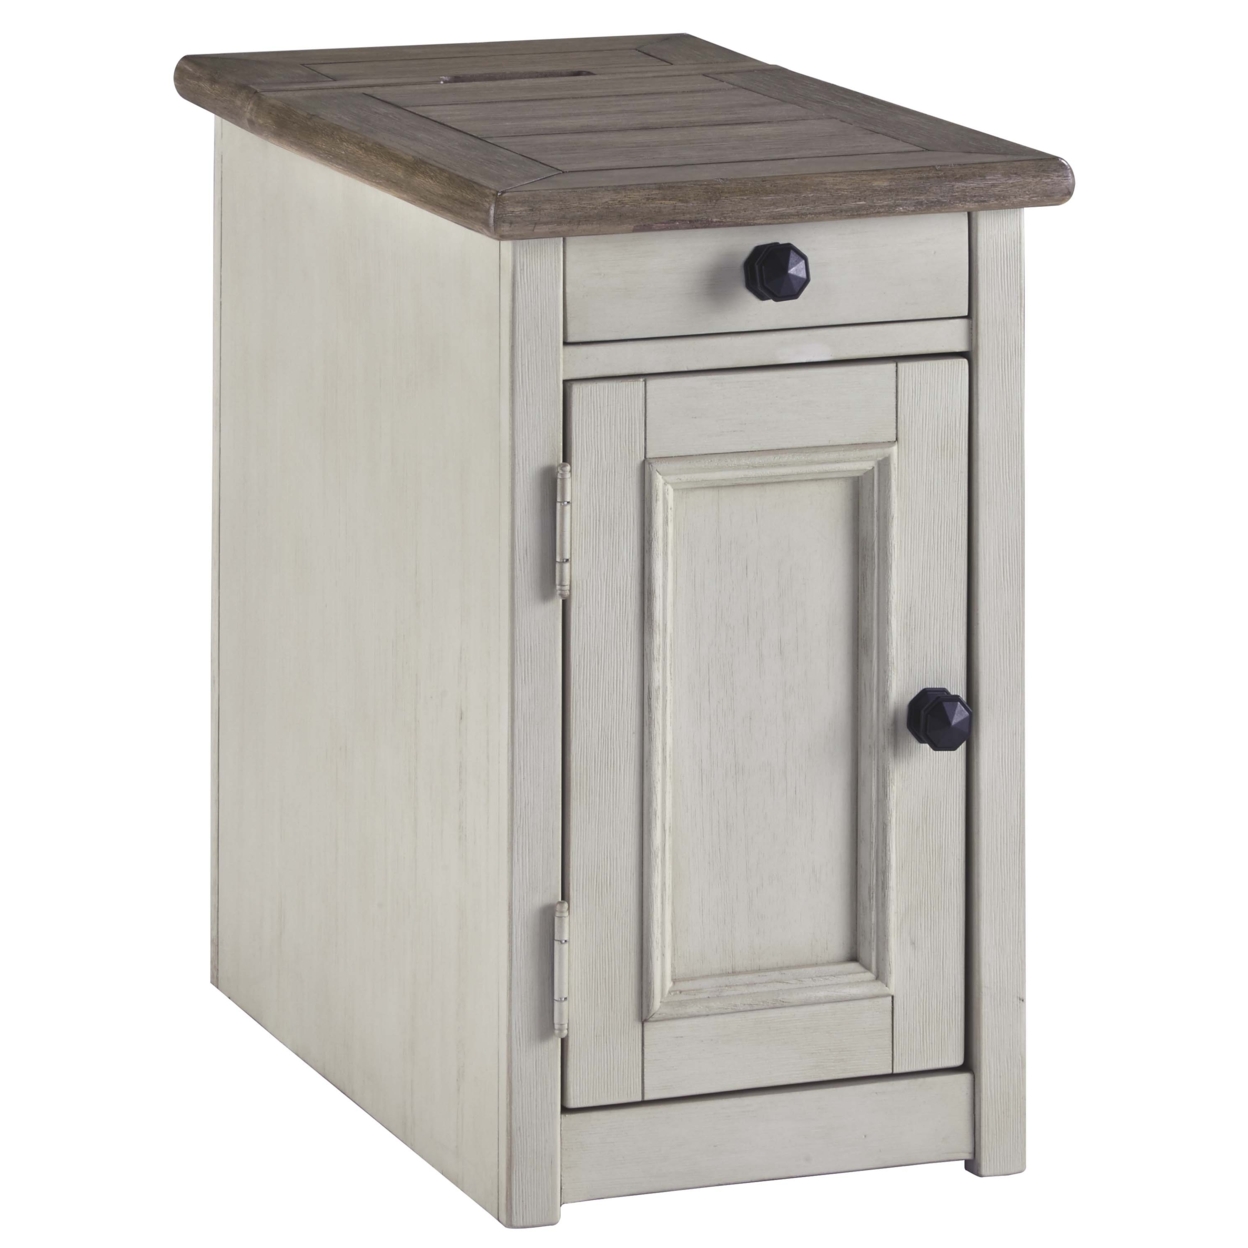 Chair Side End Table With 1 Cabinet And Pull Out Tray, White And Brown- Saltoro Sherpi